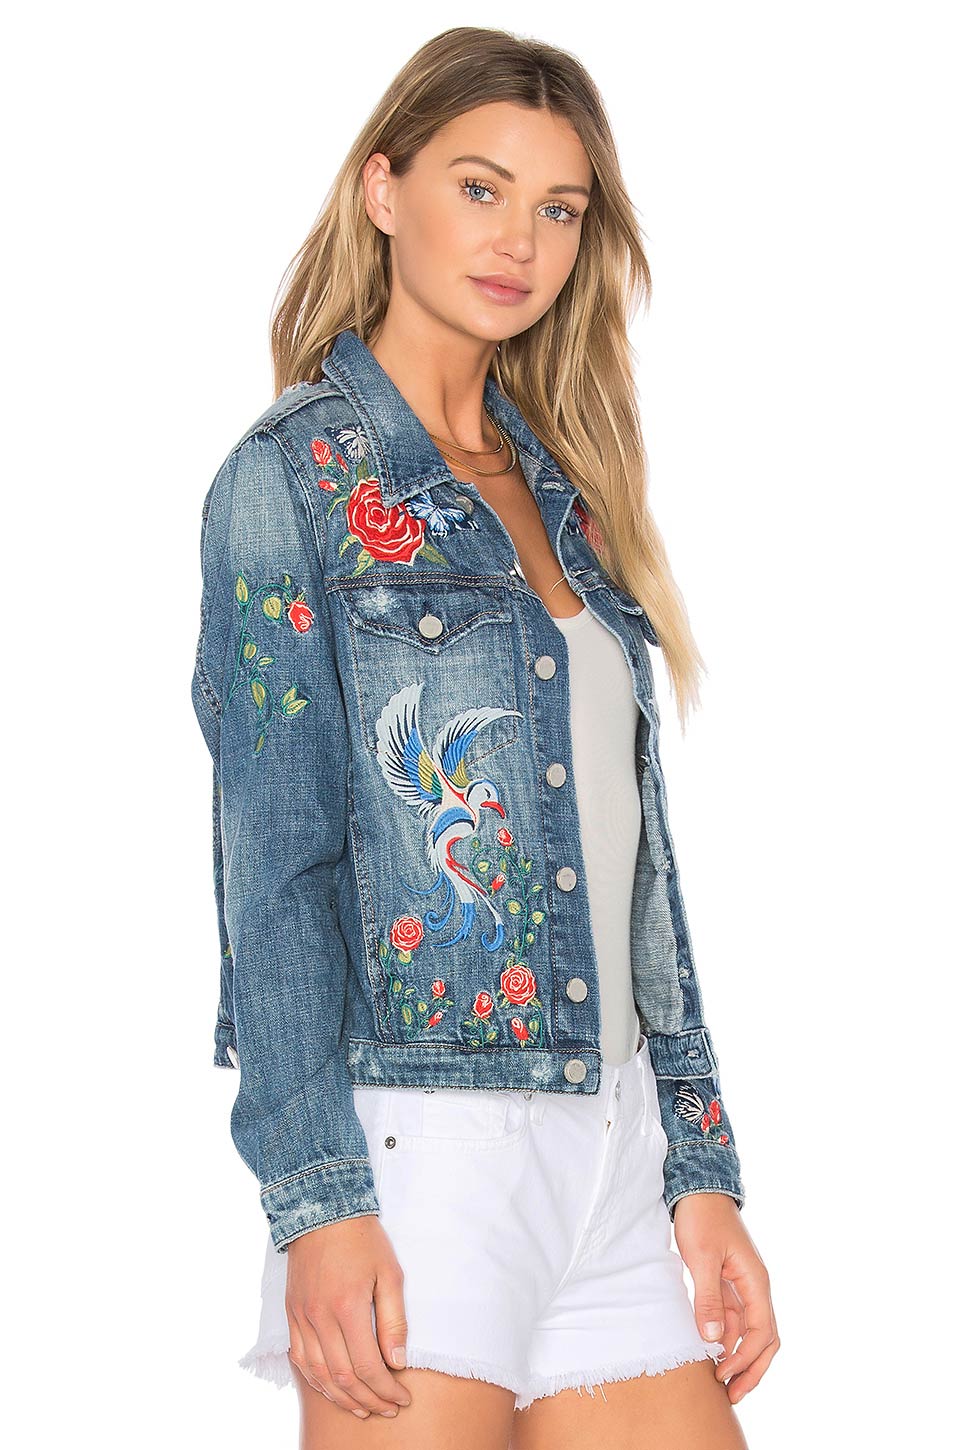 Find Of The Week: BLANK NYC Embroidered Denim Jacket - THE JEANS BLOG